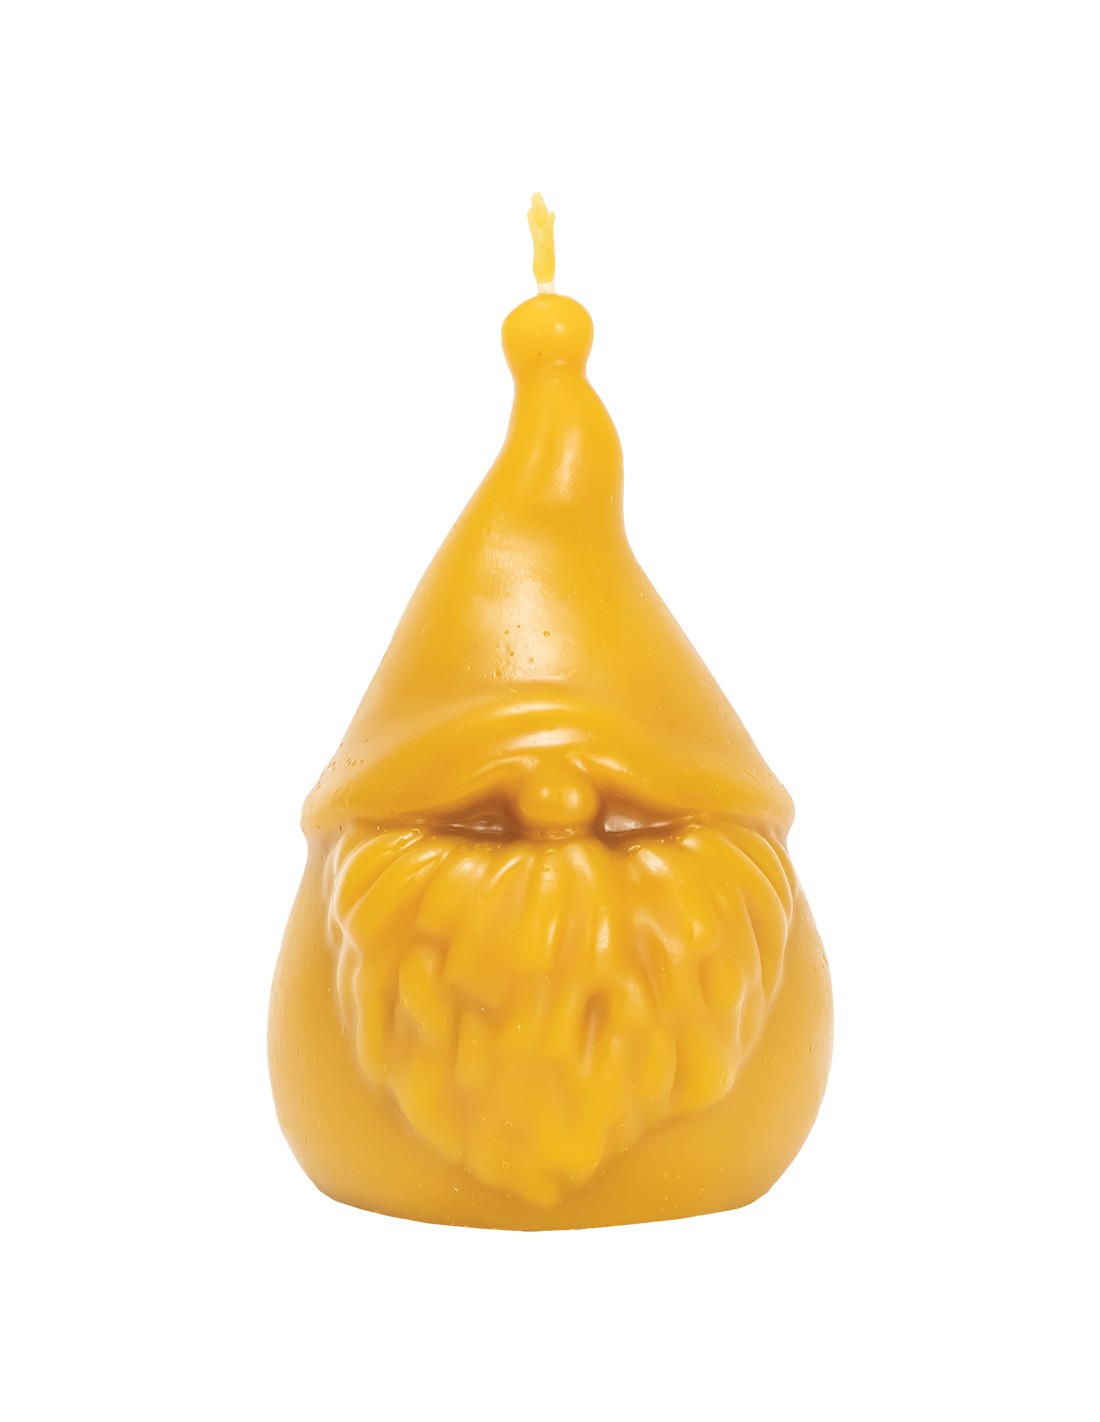 https://lyson.eu/3150-thickbox_default/silicone-mould-gnome-small.jpg